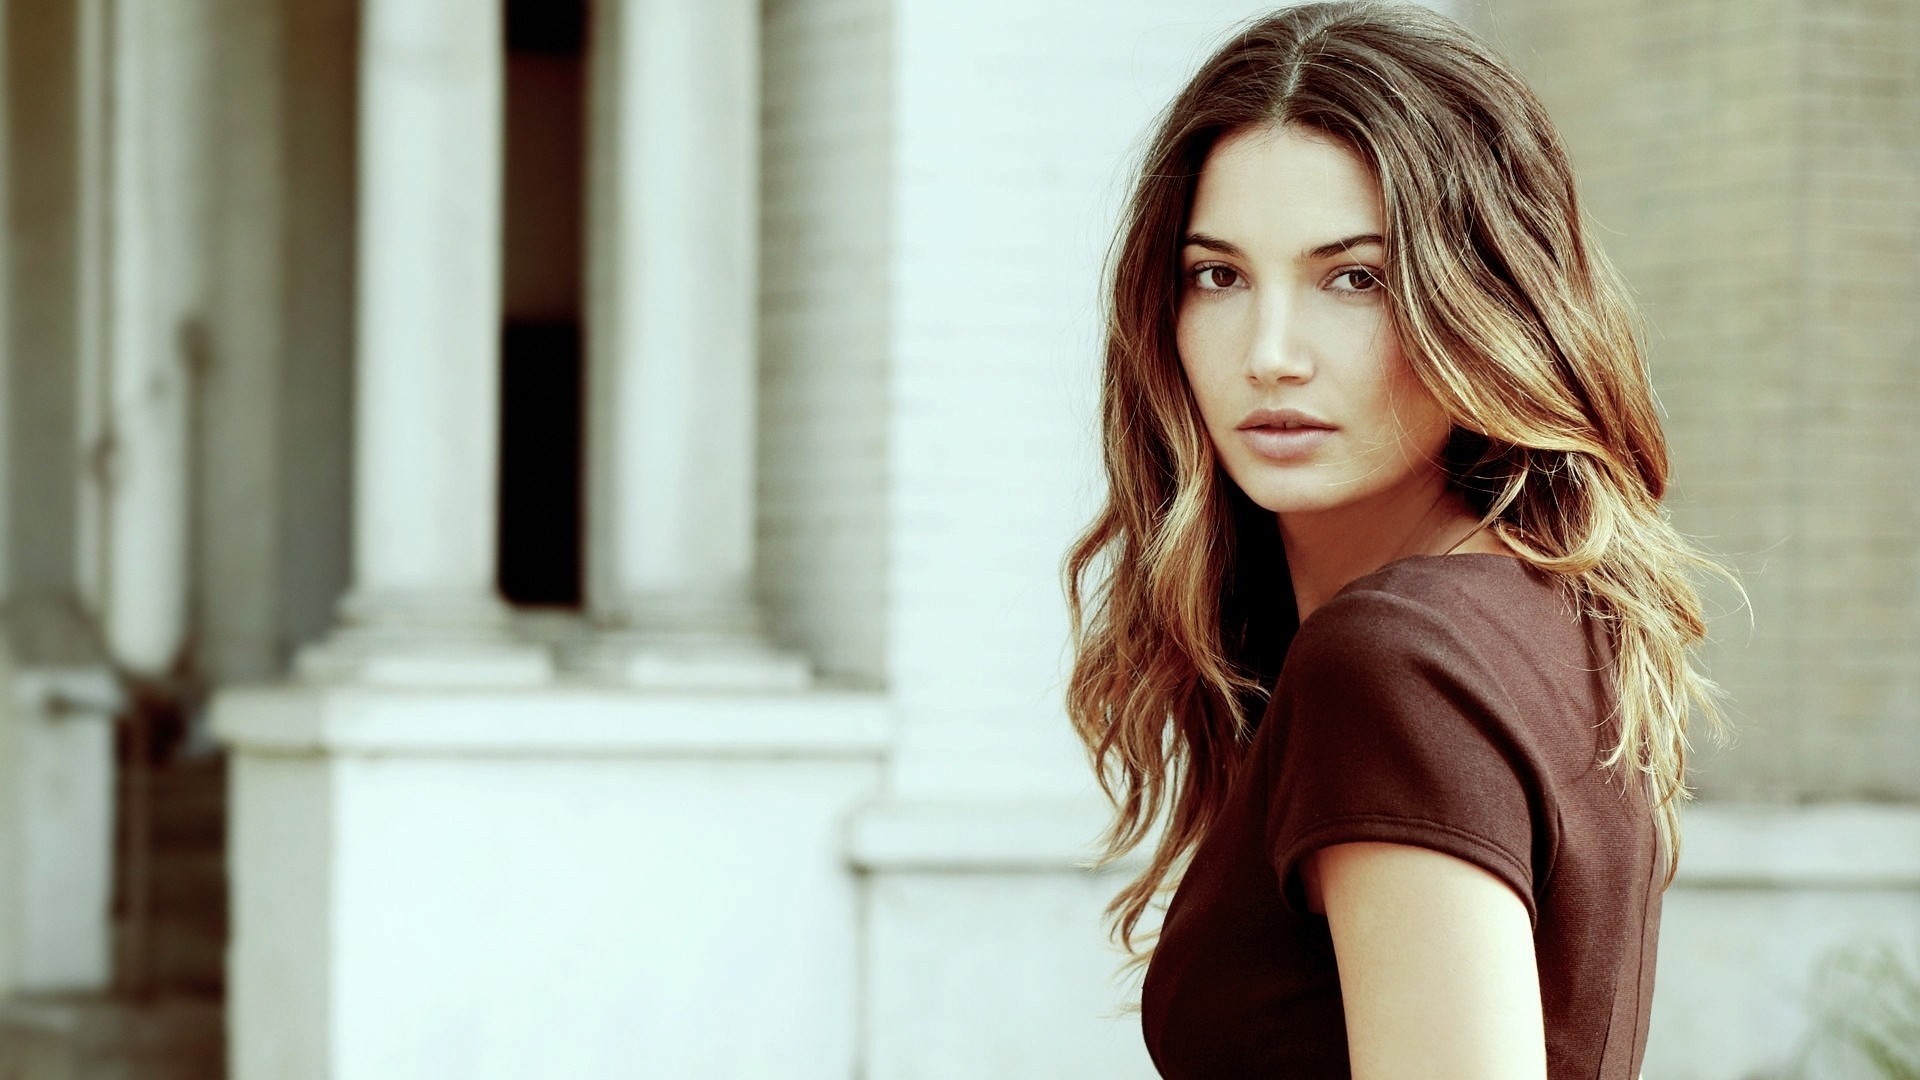 1920x1080 Related Wallpapers from Ozzy Osbourne. Lily Aldridge Beautiful Girl Model